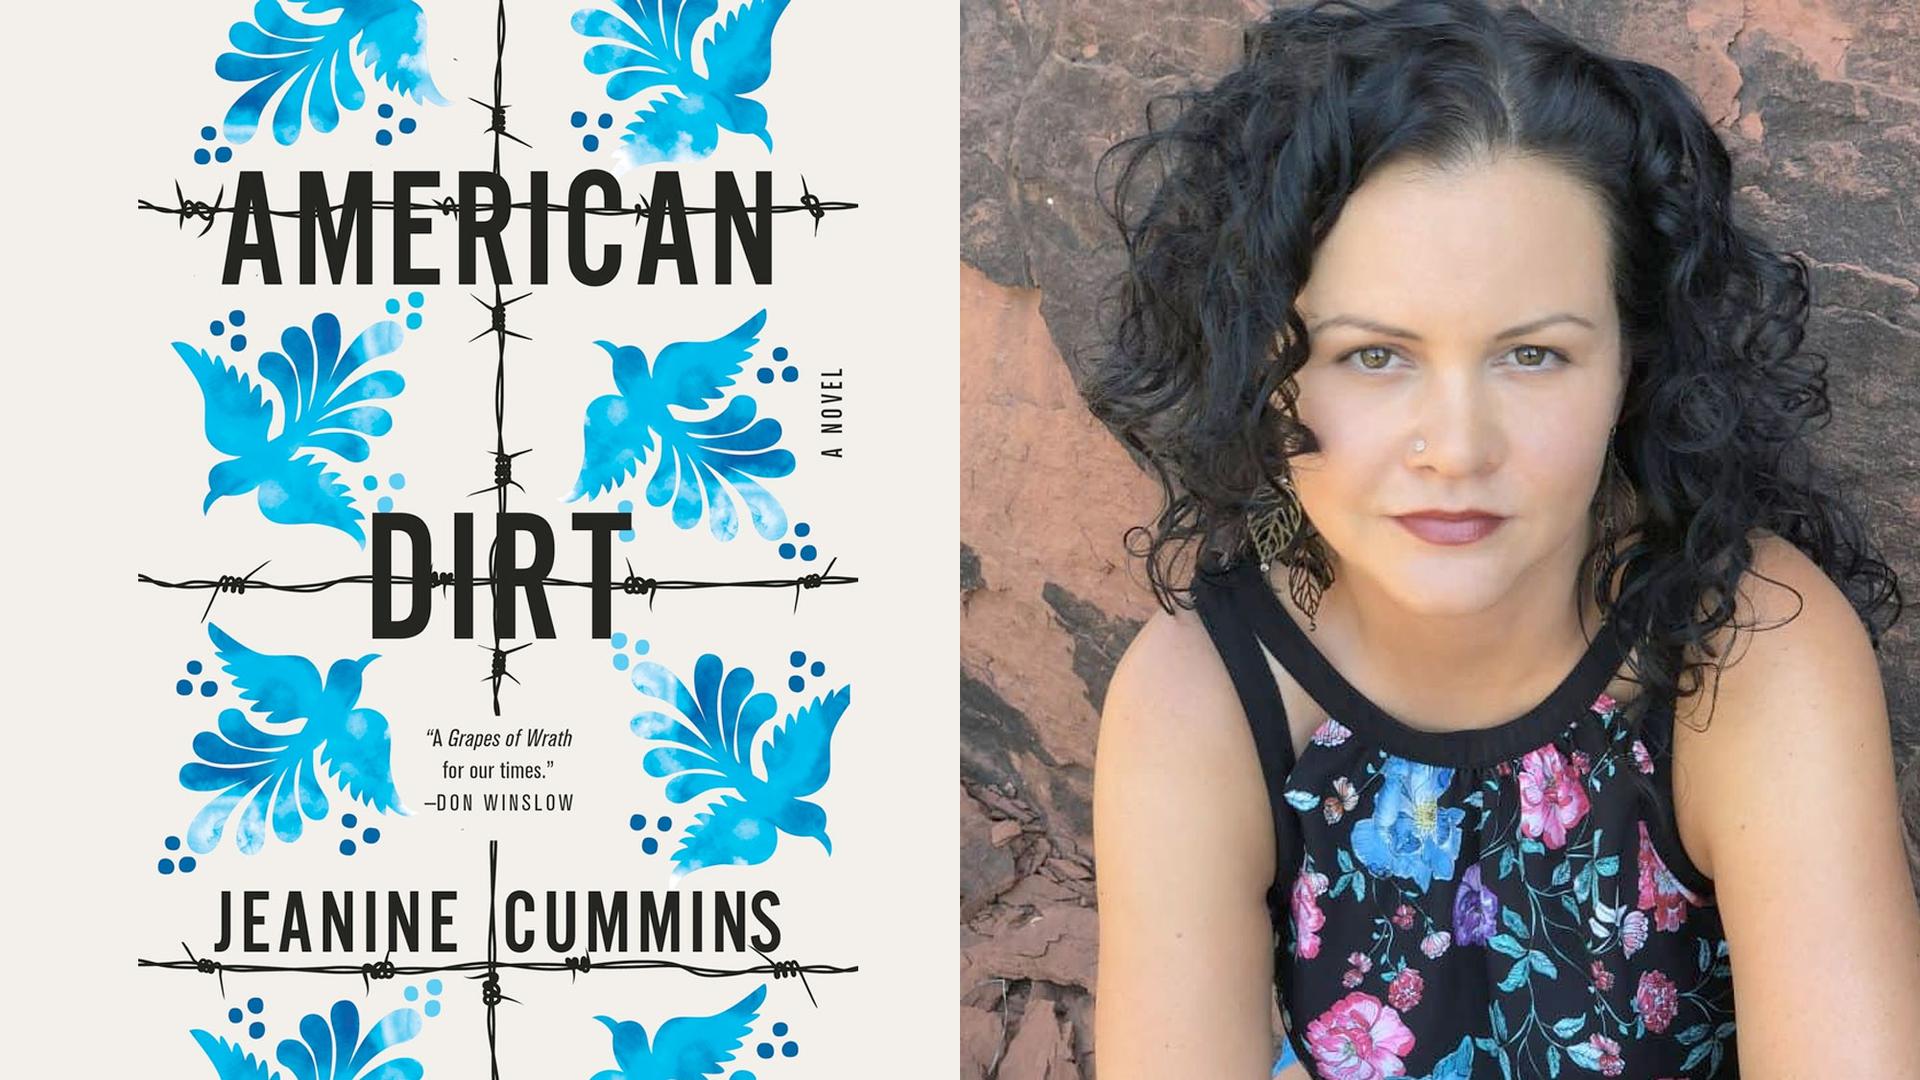 (L) The cover of "American Dirt" and (R) author Jeanine Cummins.